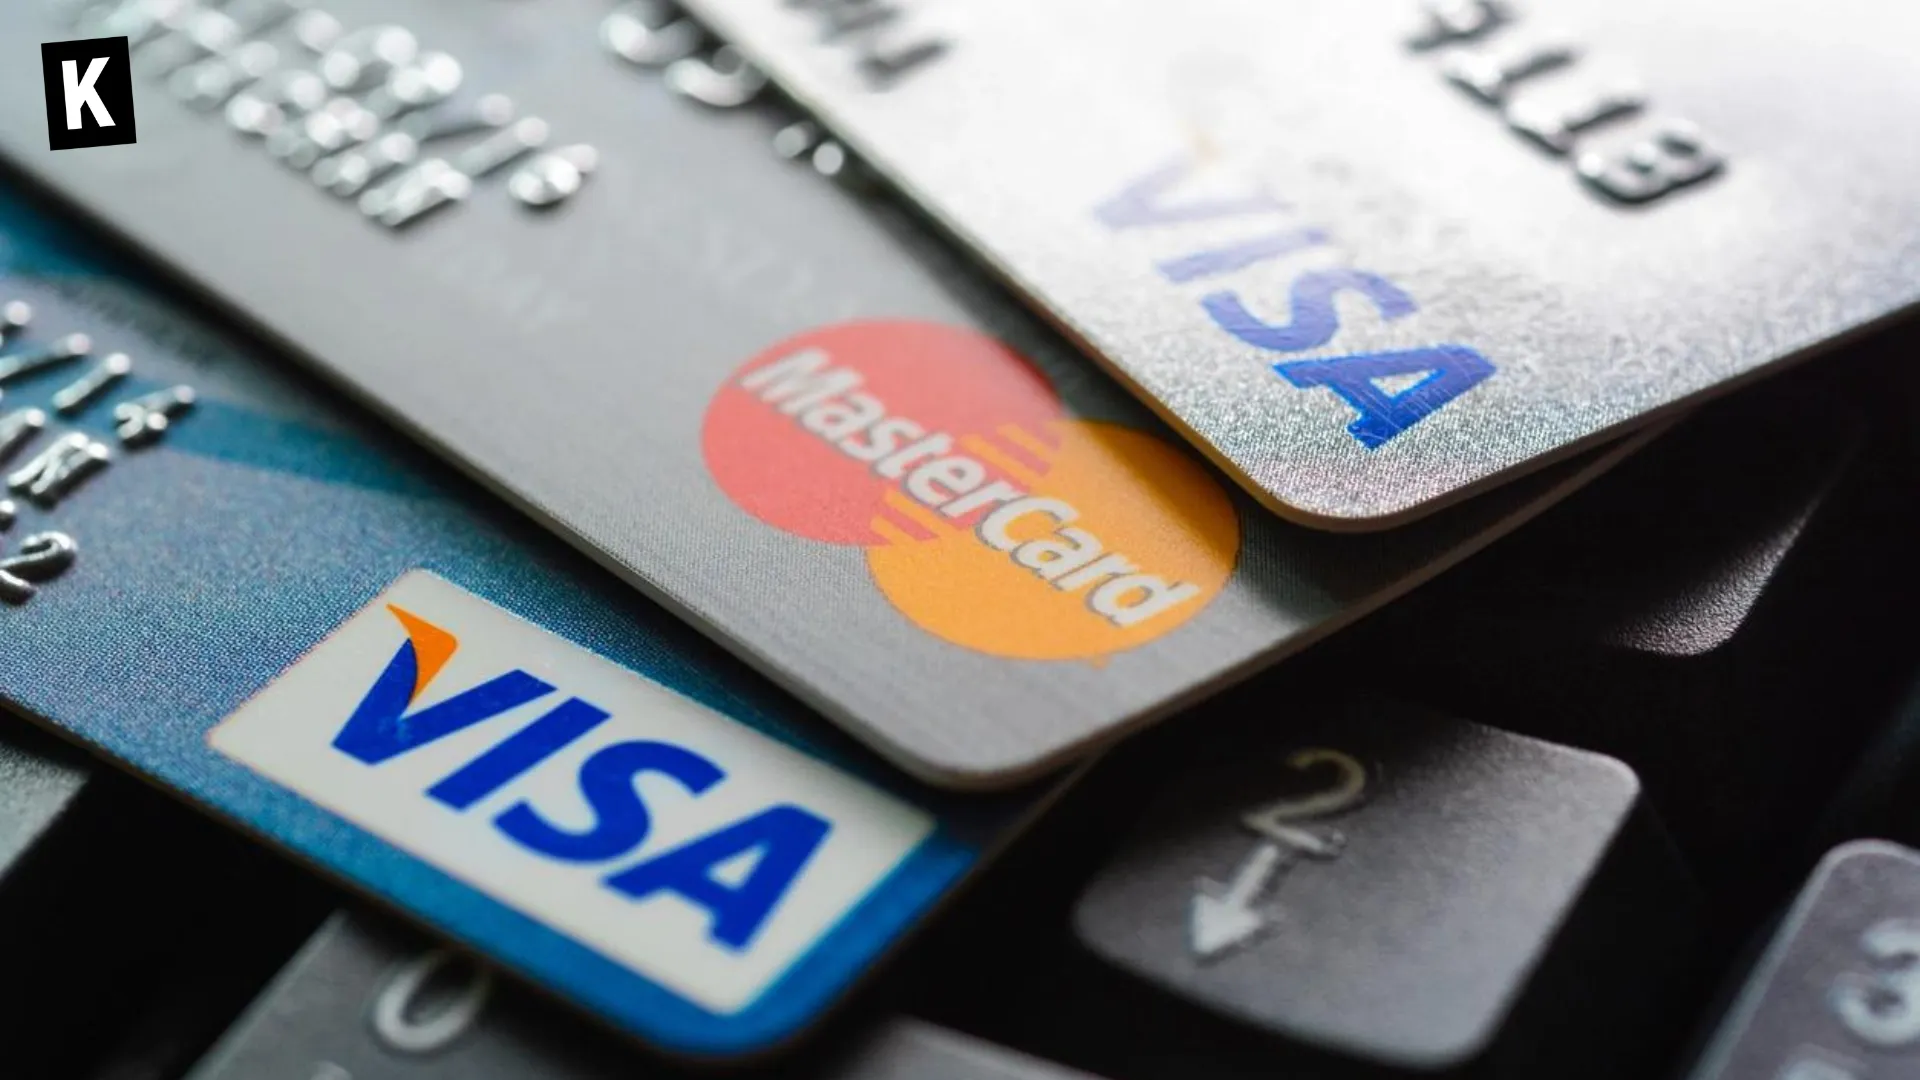 Visa reconfirms its interest for crypto